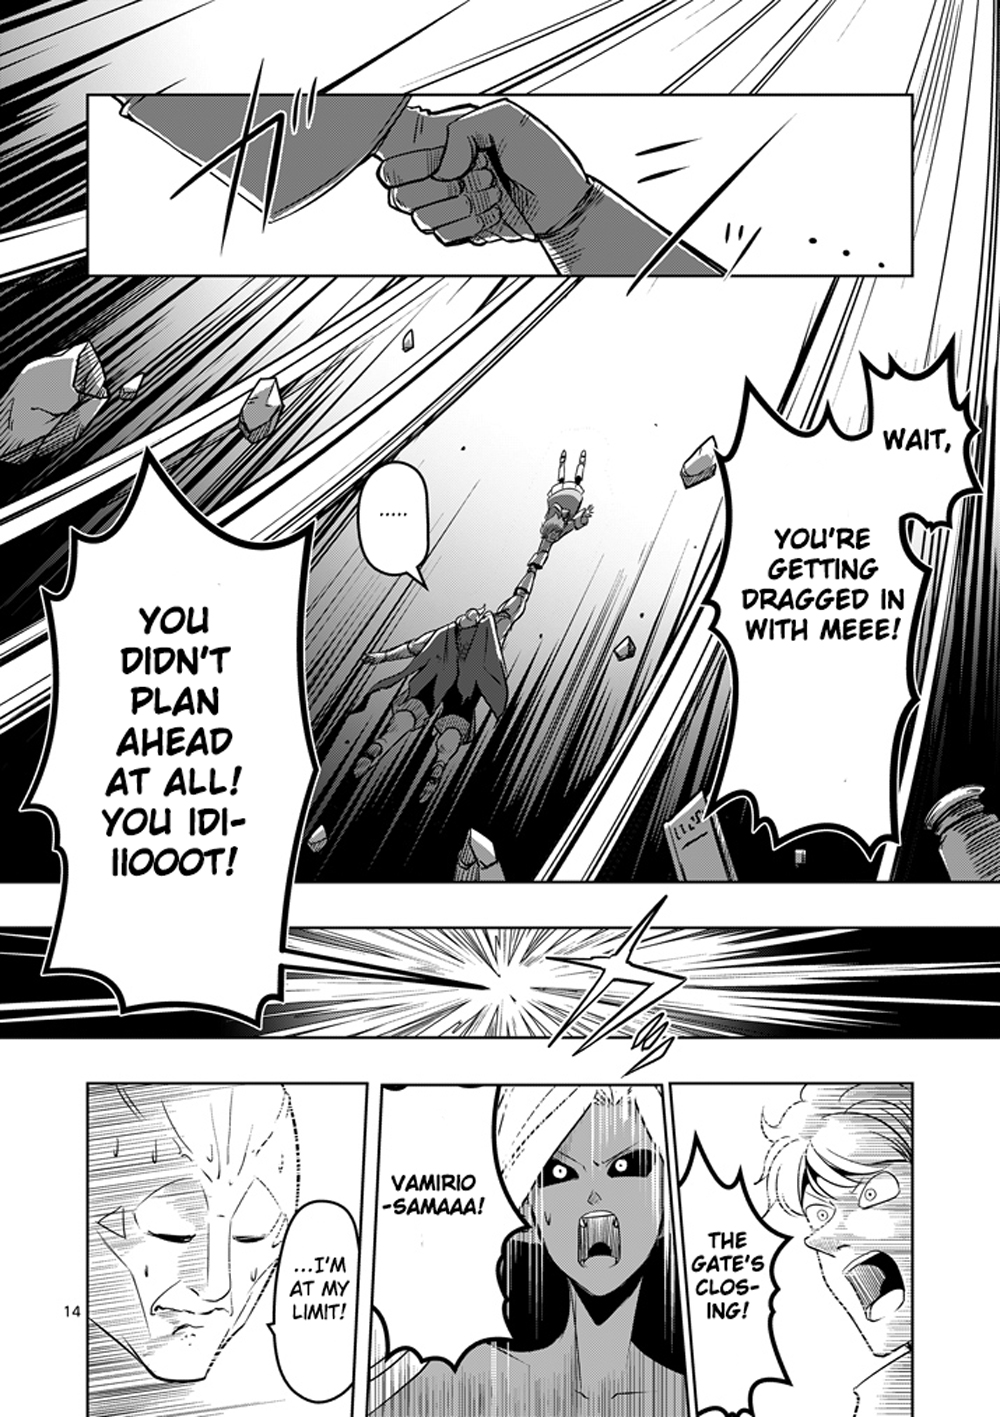 Helck Ch.12